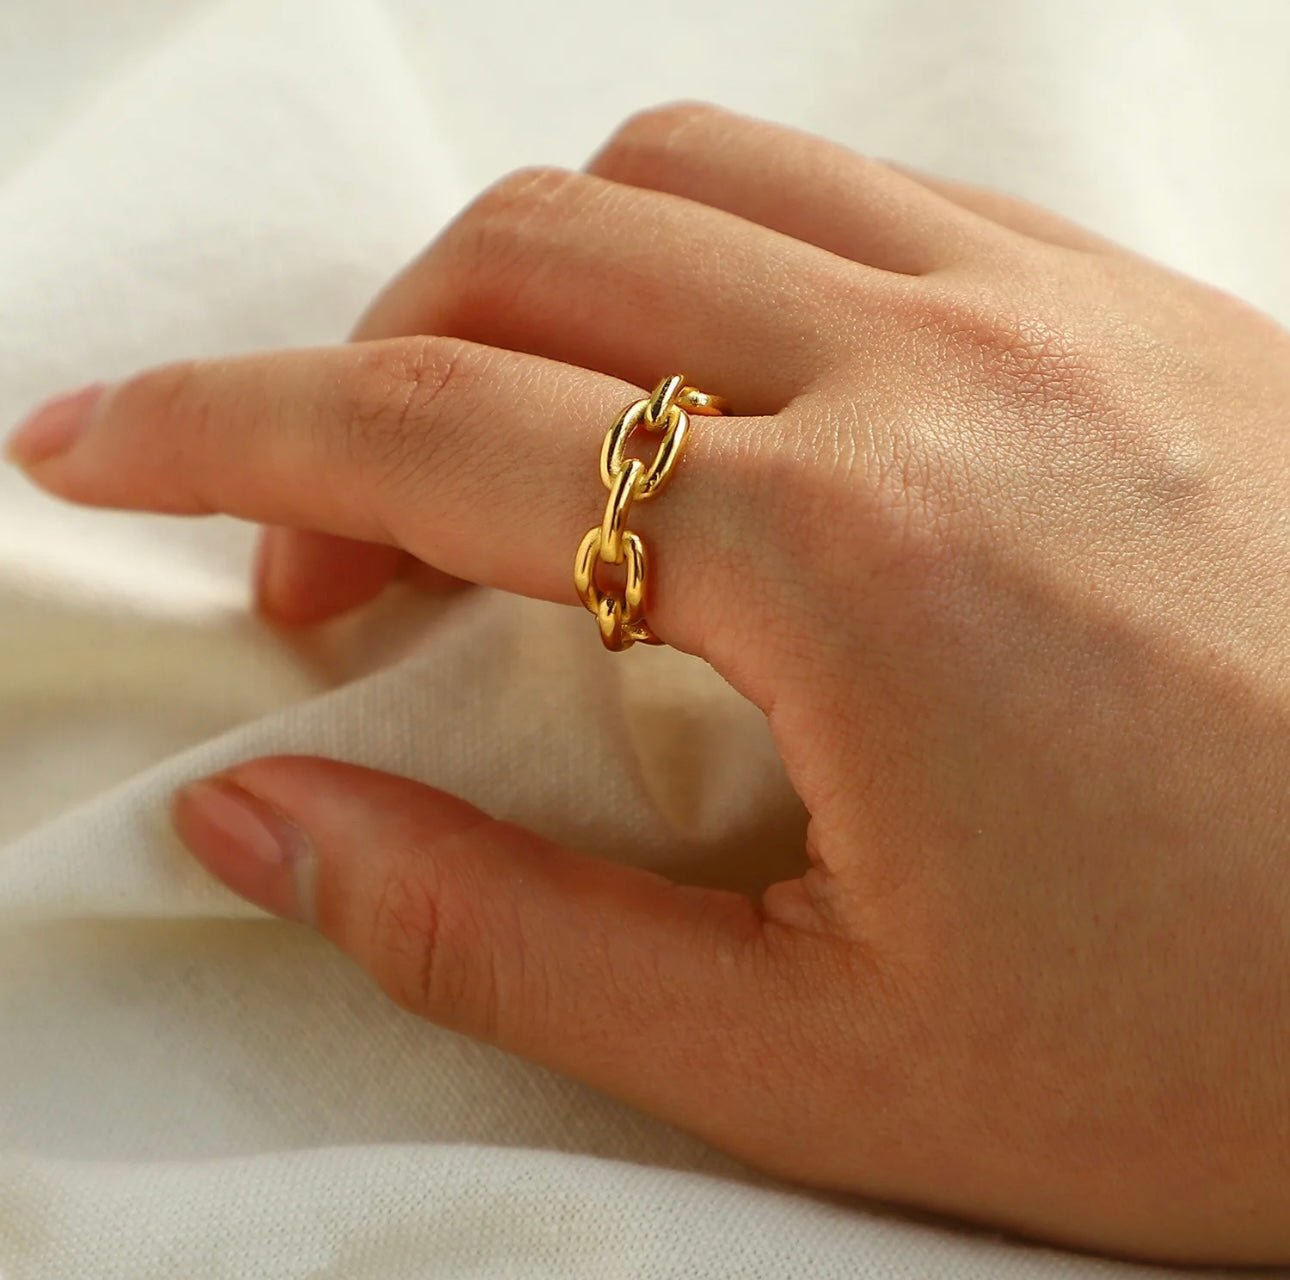 14k gold chain link band ring